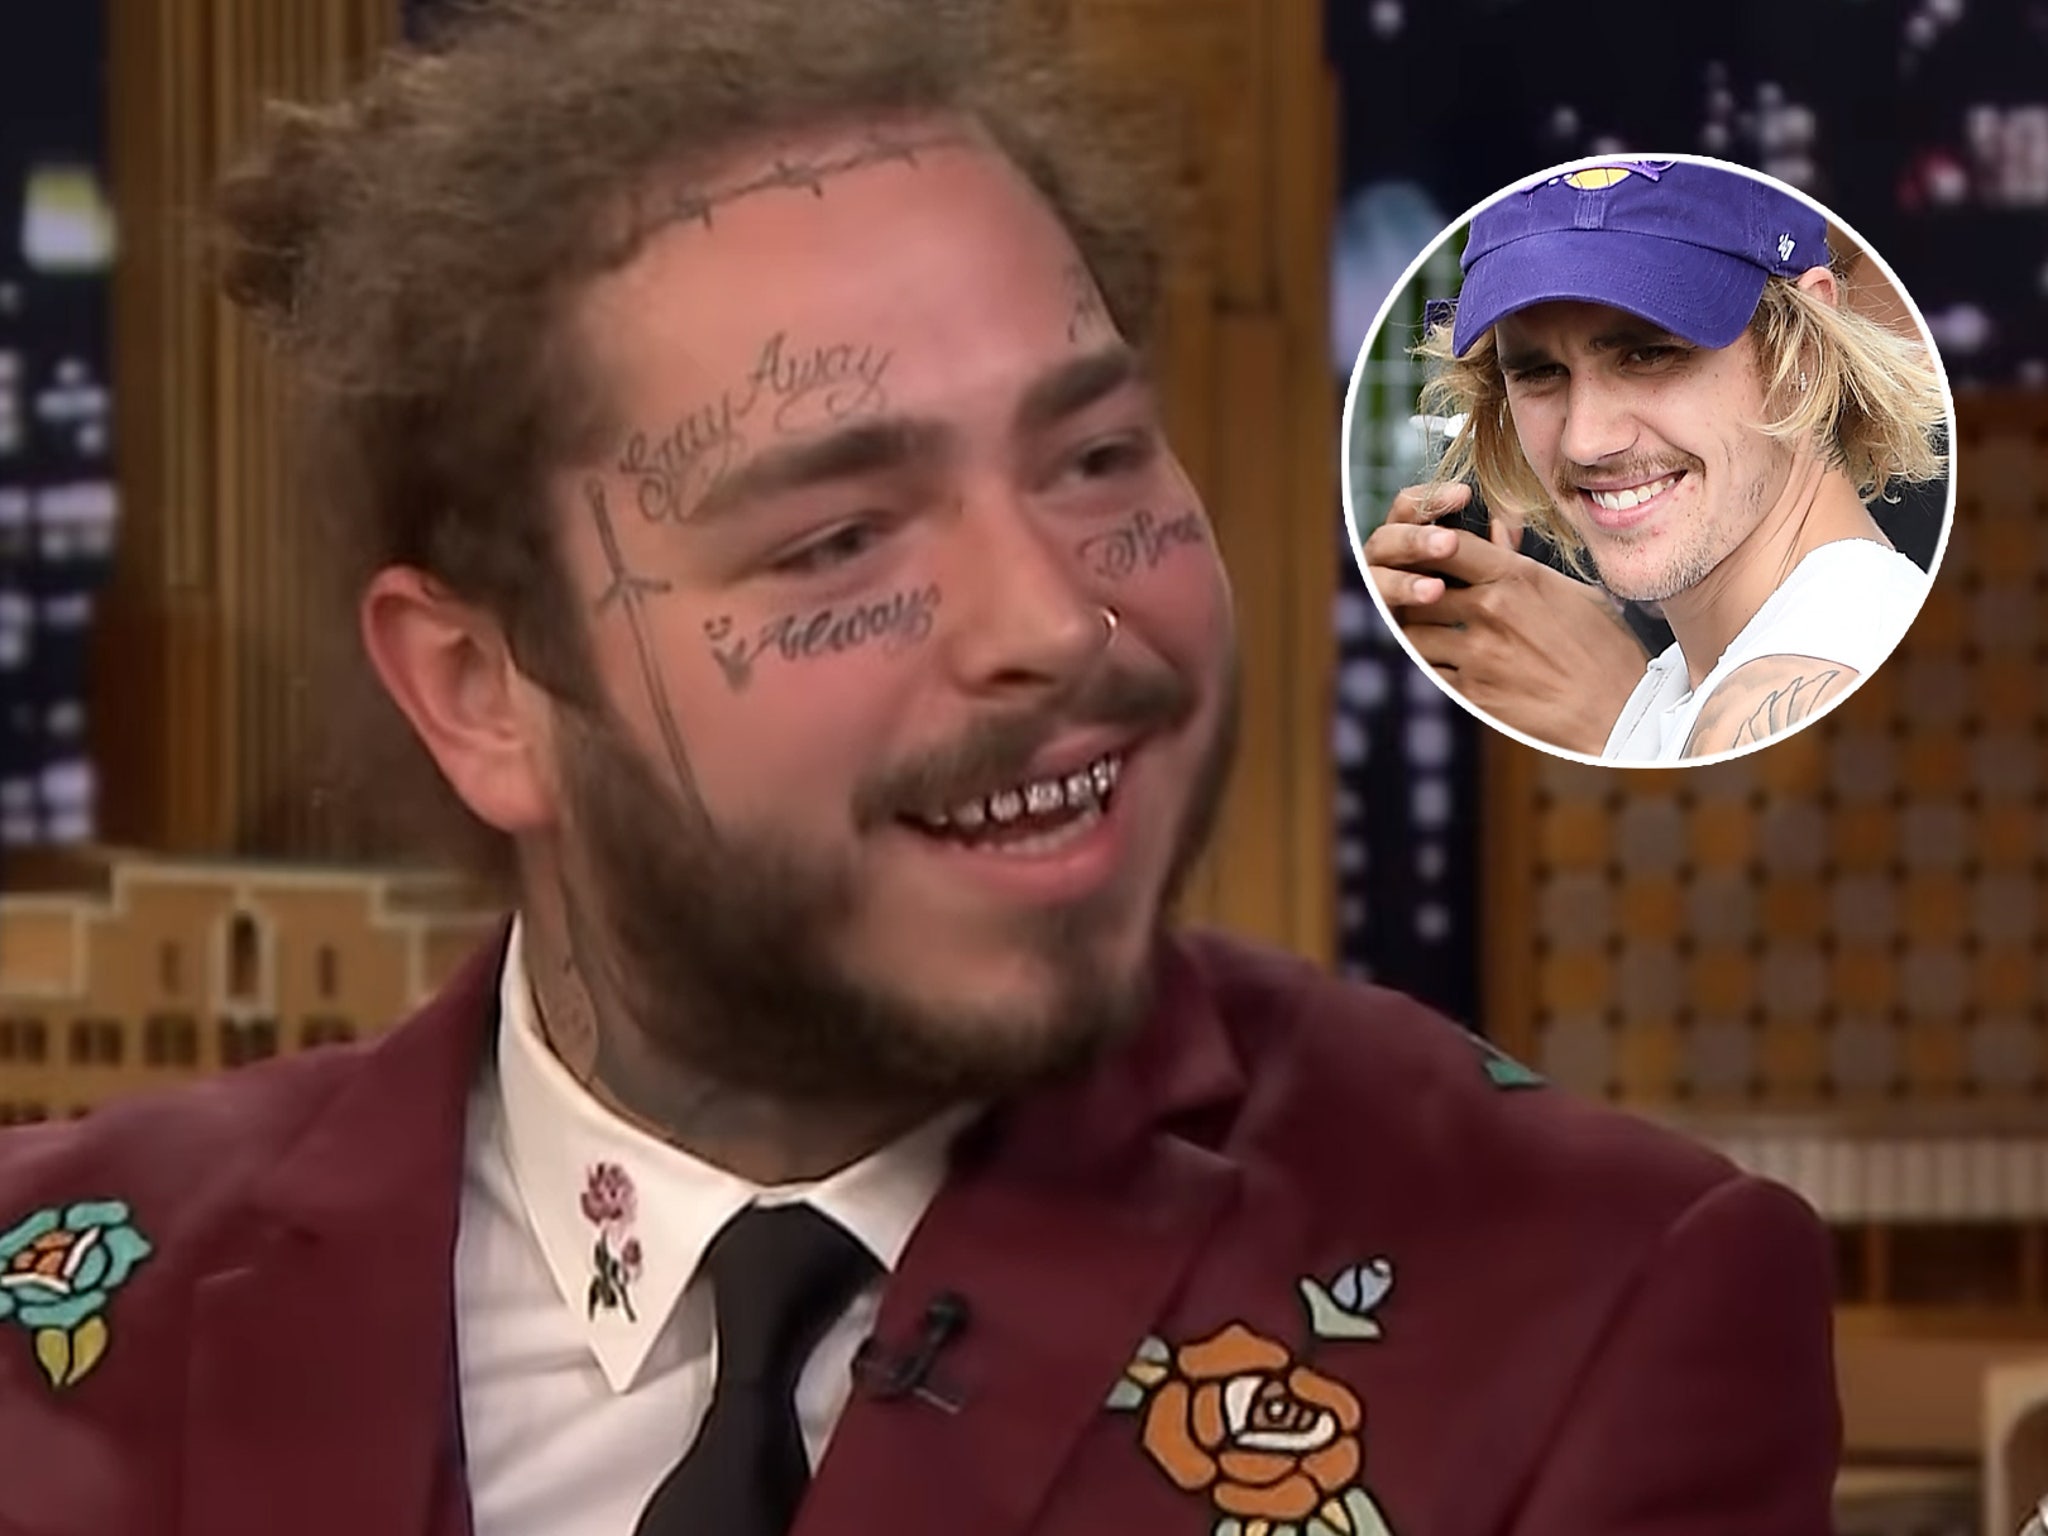 Post Malone Photoshop Makeover  Removing Tattoos  Other Touches  YouTube